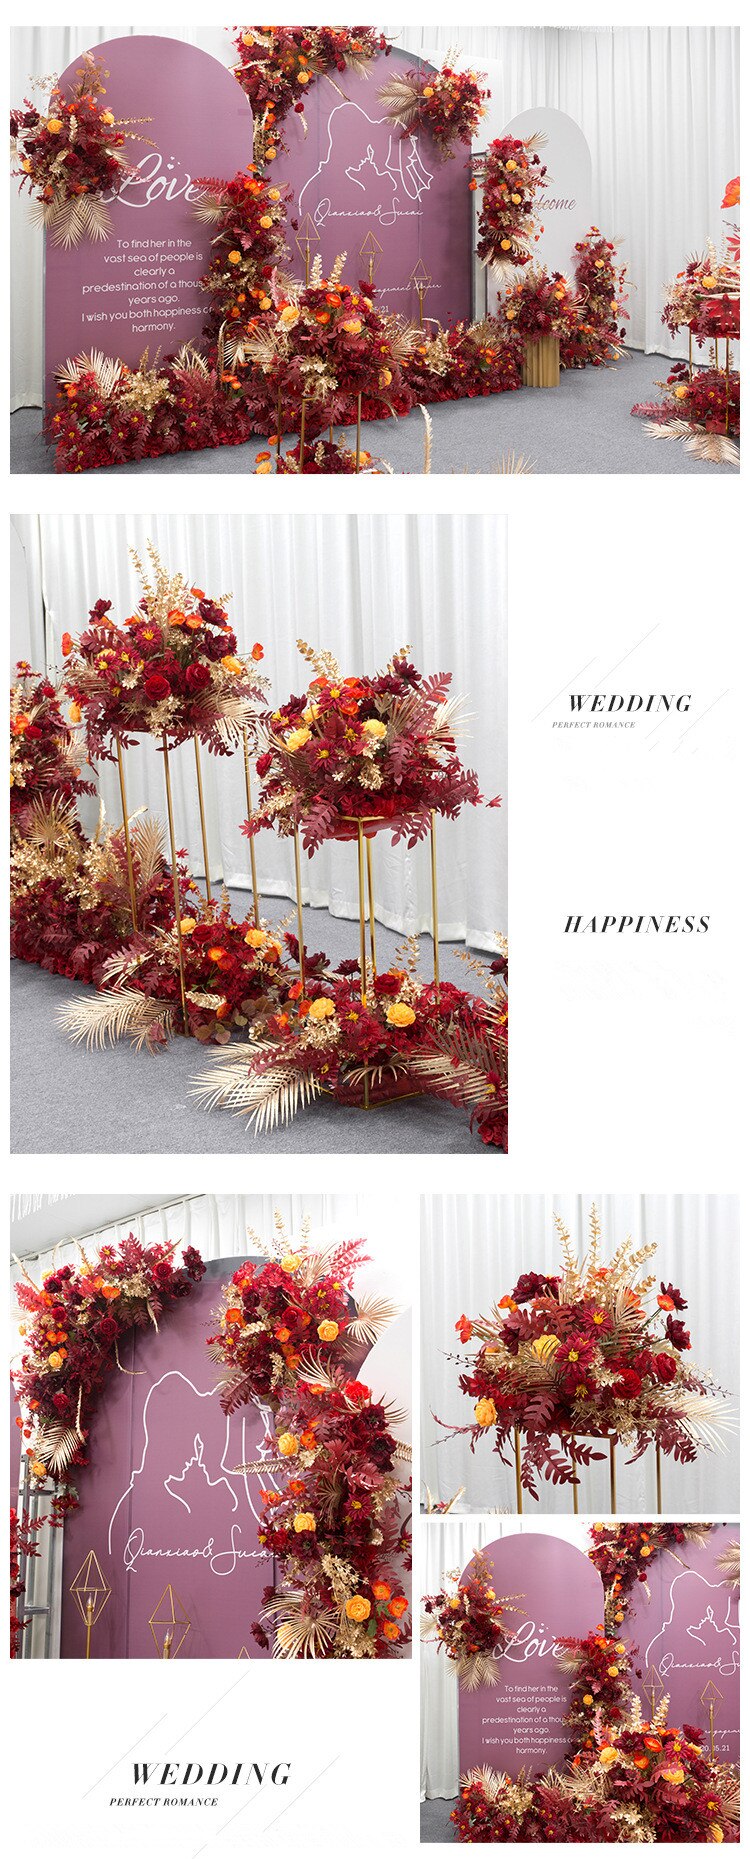 Incorporating meaningful elements into headstone floral displays